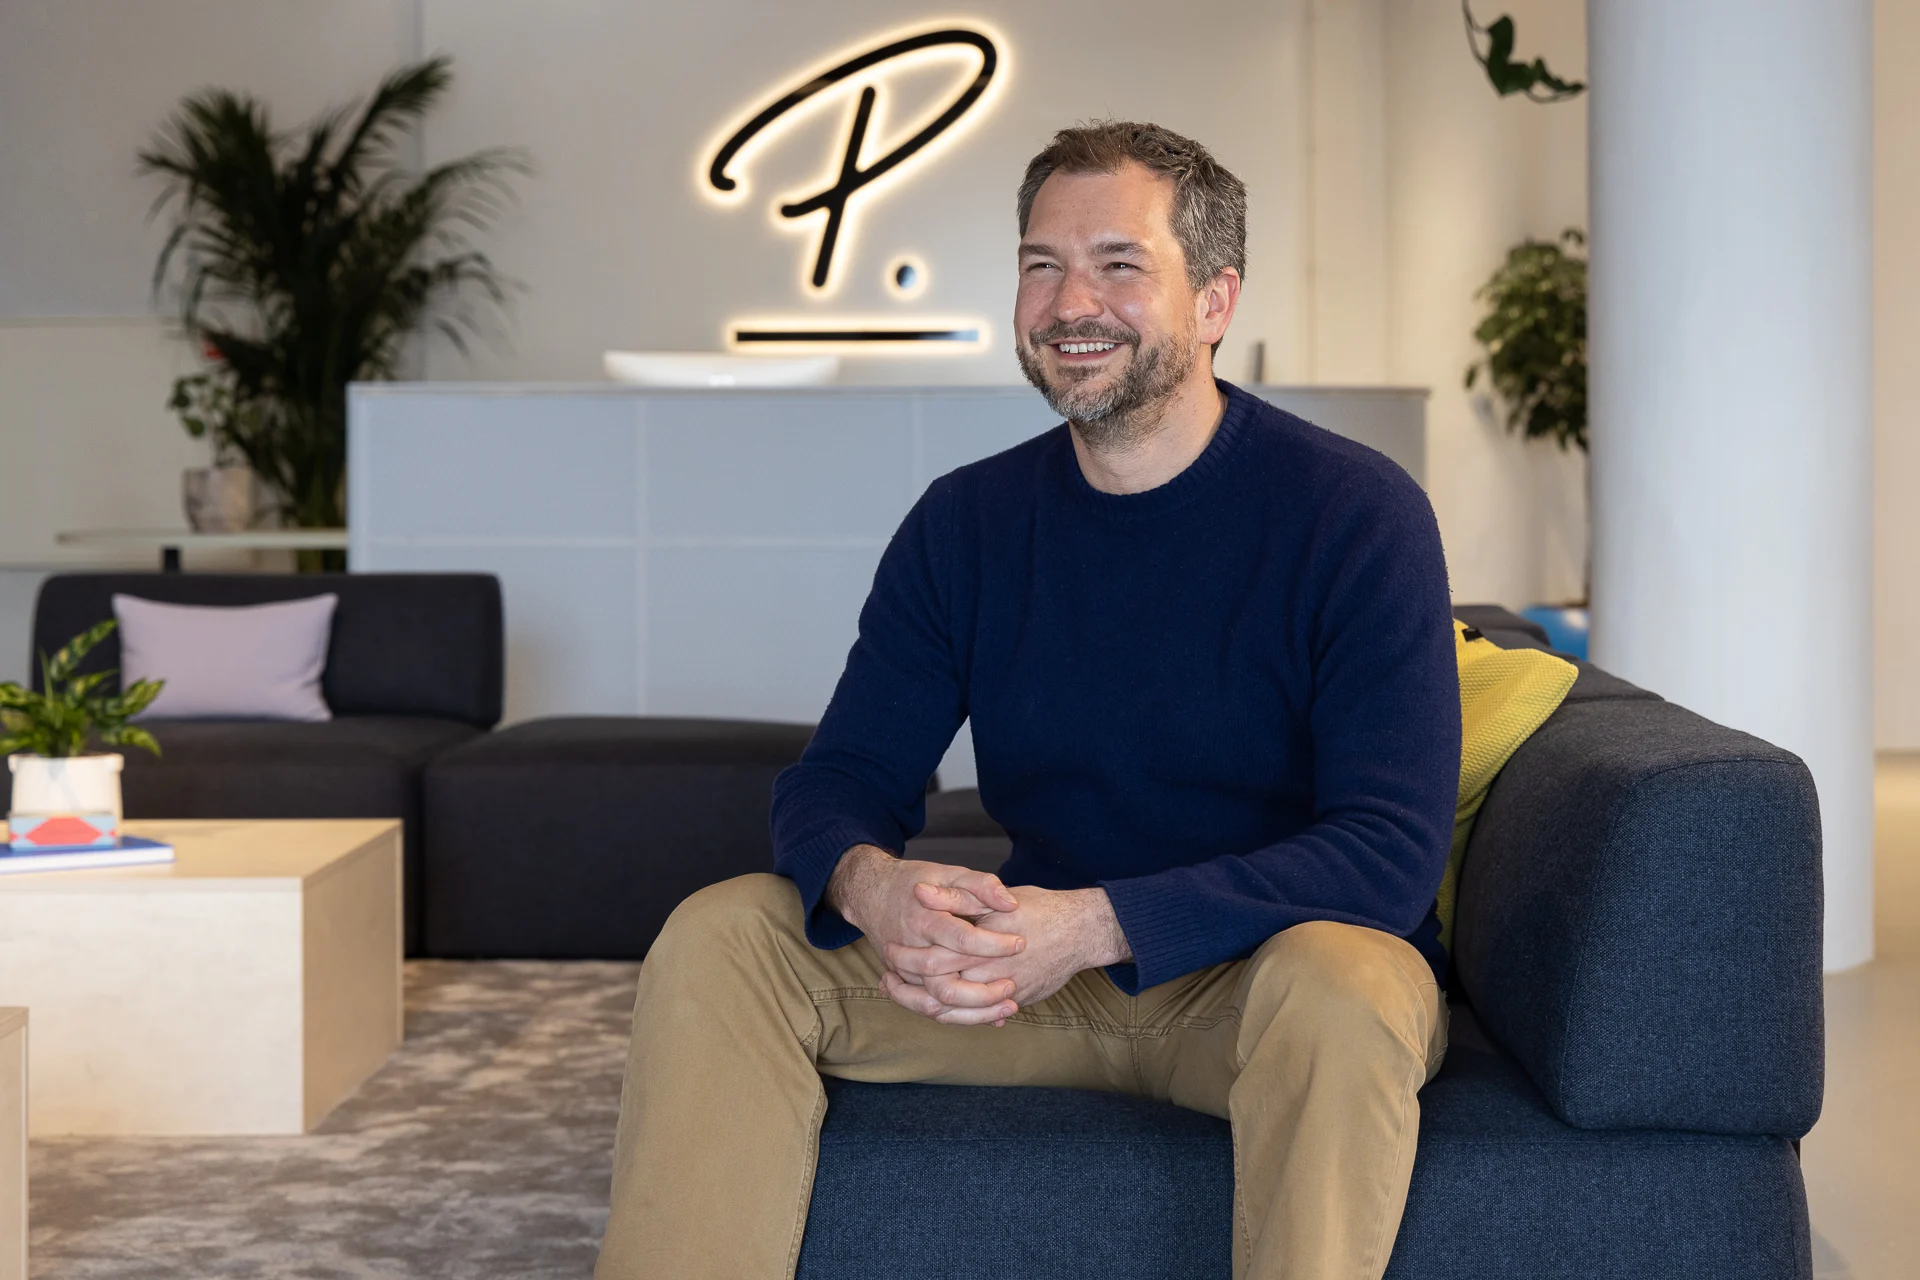 Luke smiling in the Amsterdam office with Personio logo behind him